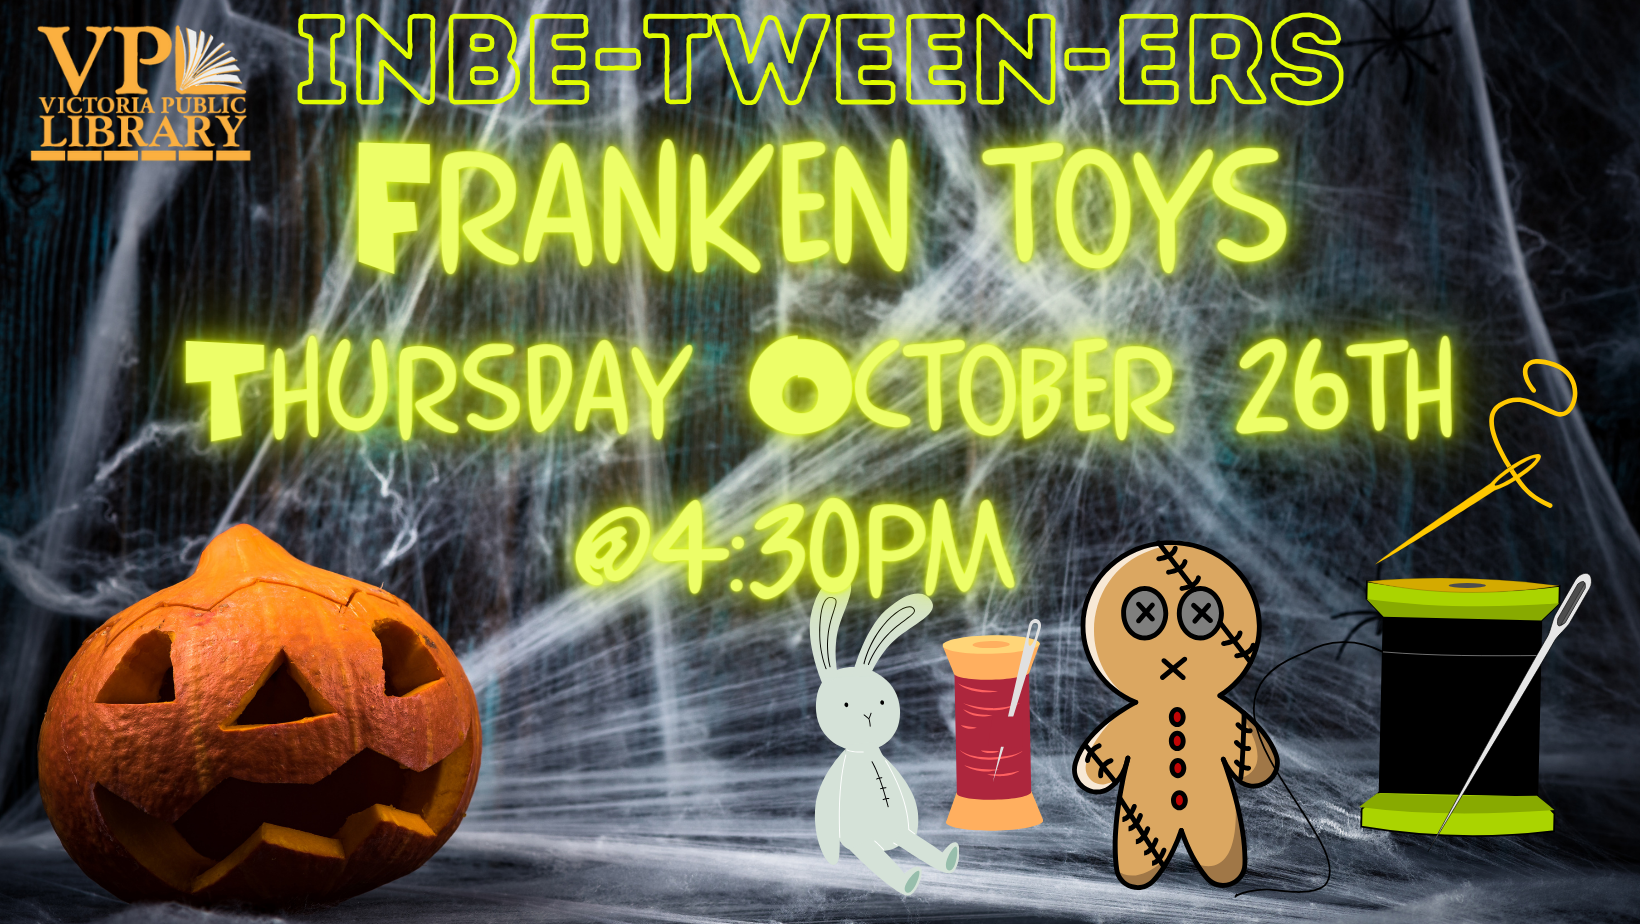 Our favorite program is back! Join us as we tear apart teddy bears and dolls to create FRANKEN TOYS! What will you create??? All materials provided.